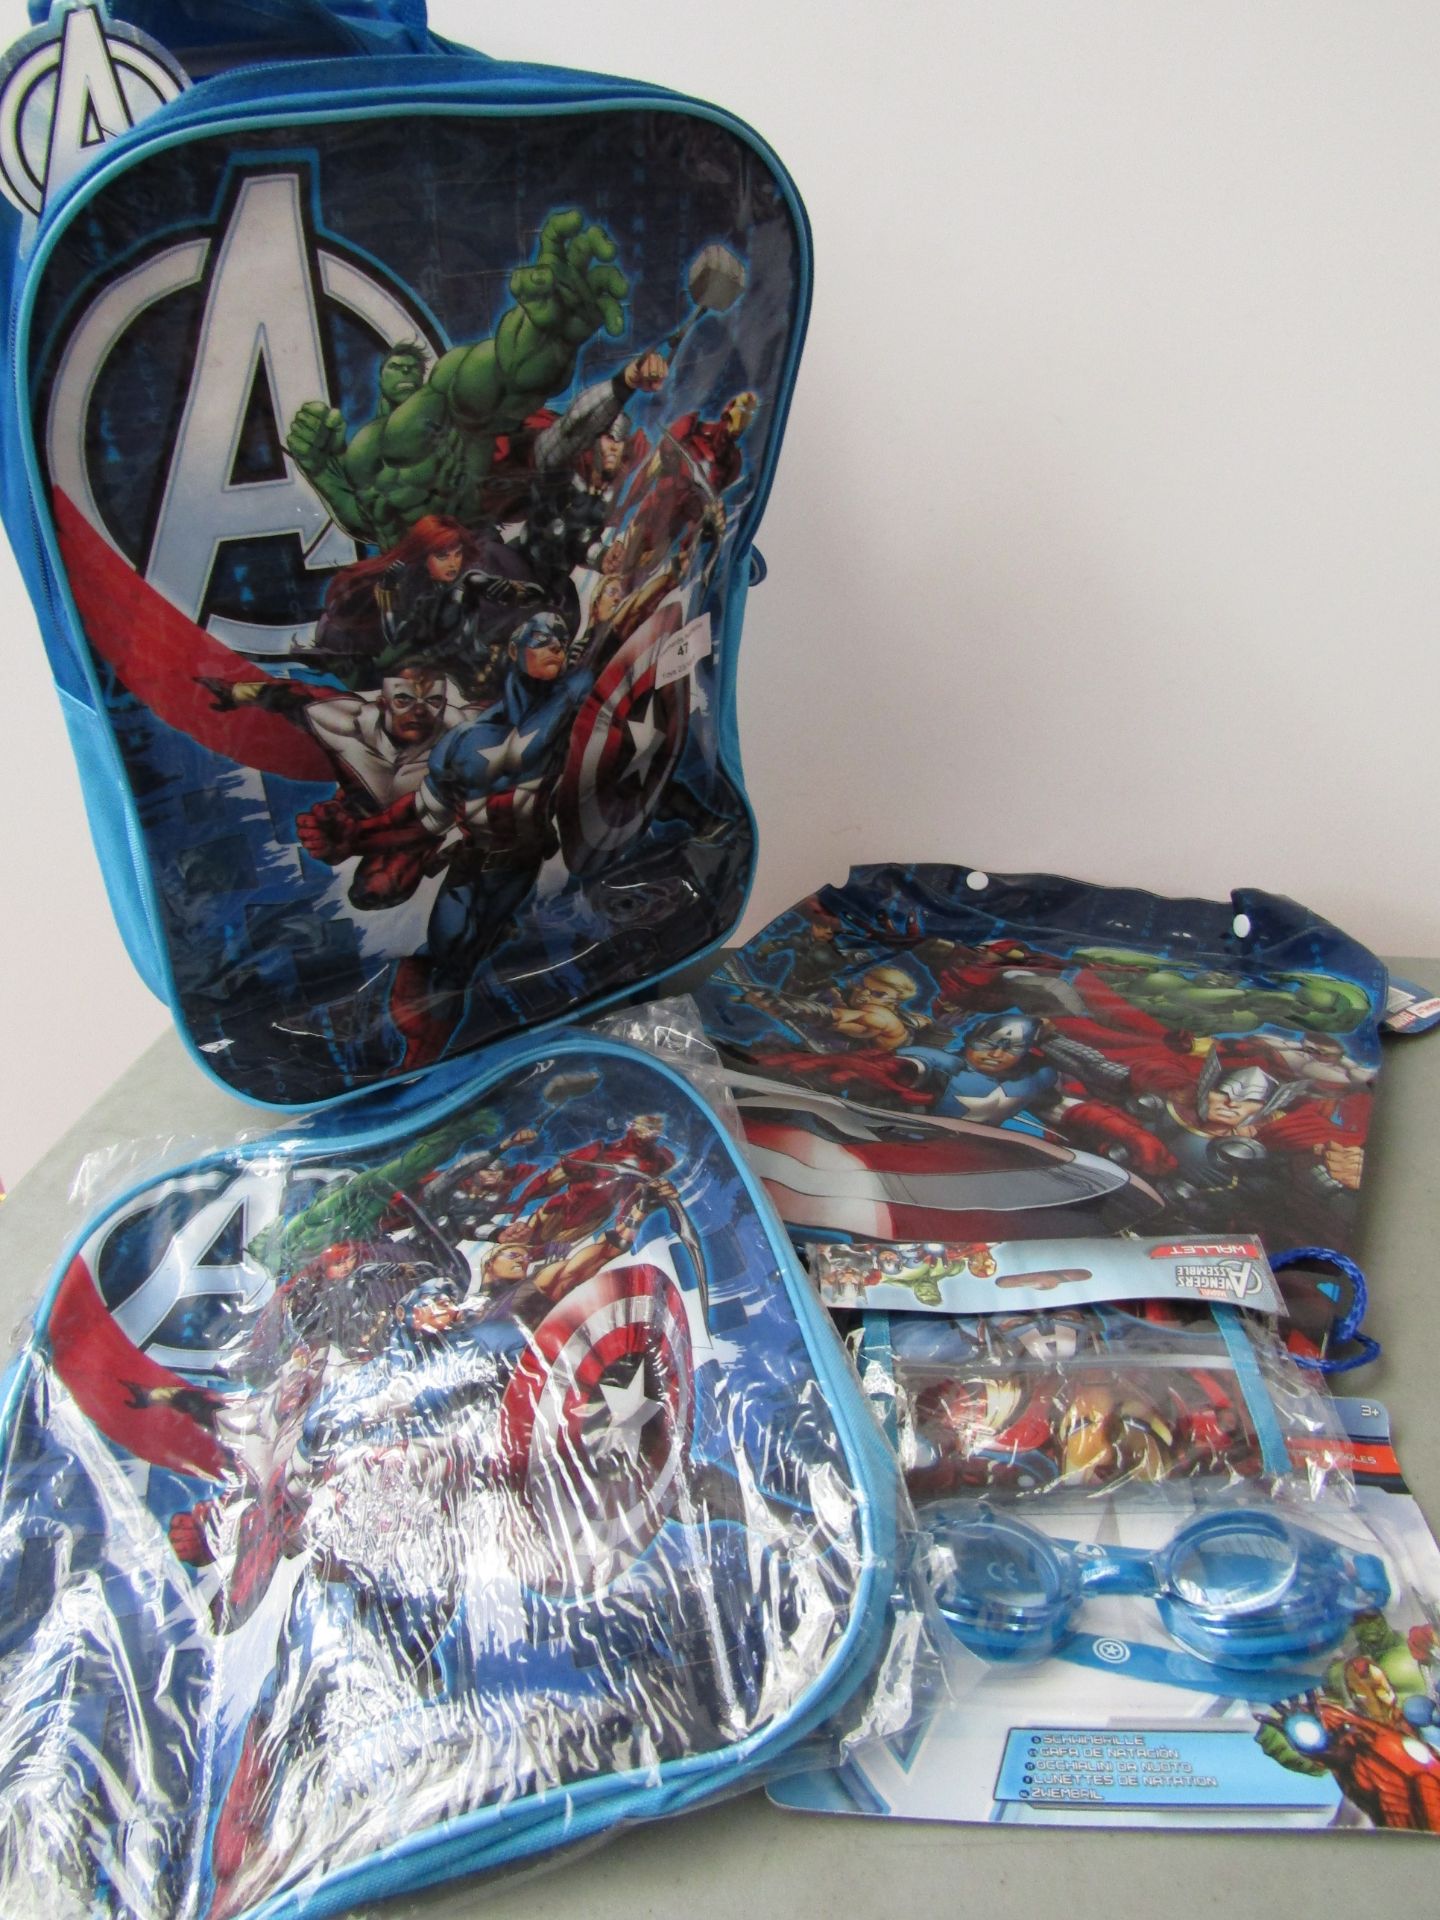 Marvel Avengers rollercase set new with tags, includes; Rollercase Rucksack Swimbag Goggles Wallet.